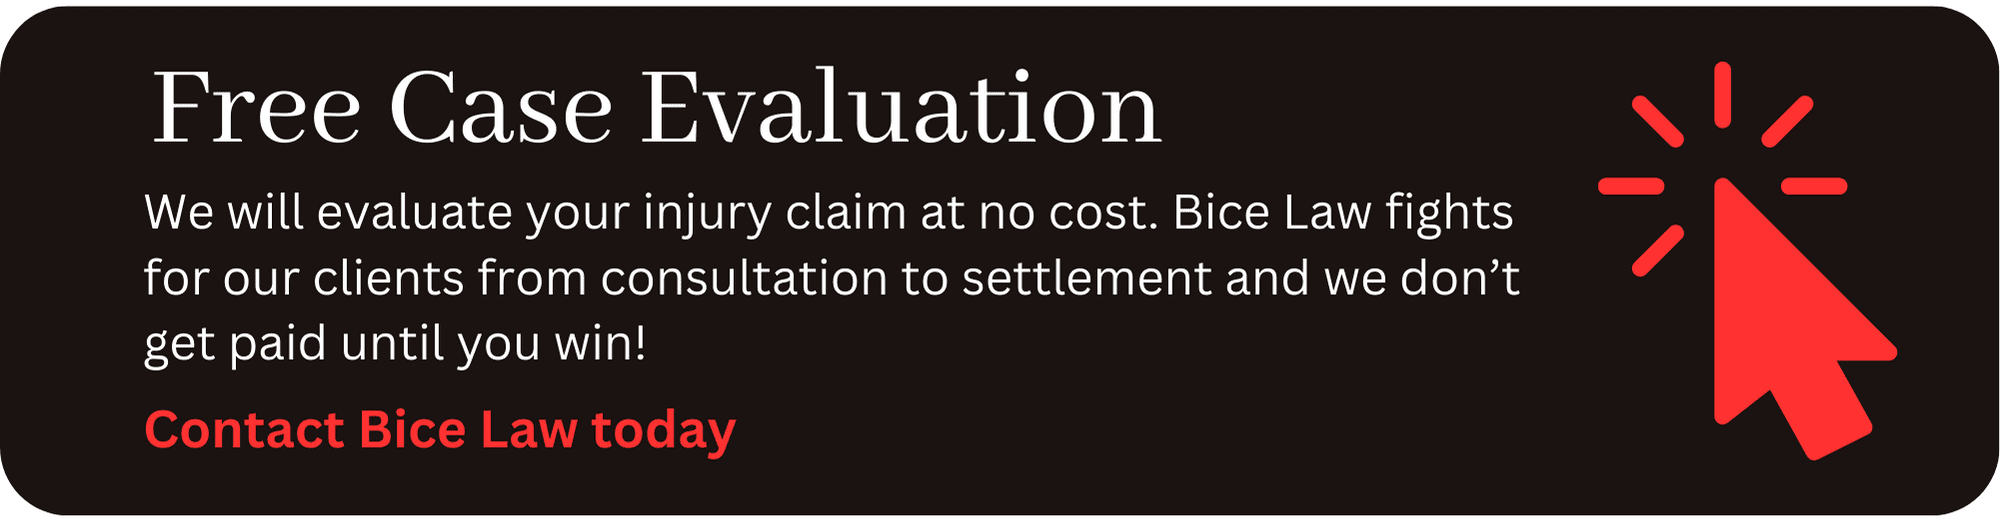 Free Caase Evaluation Button - Car Accident Claim in Winston-Salem